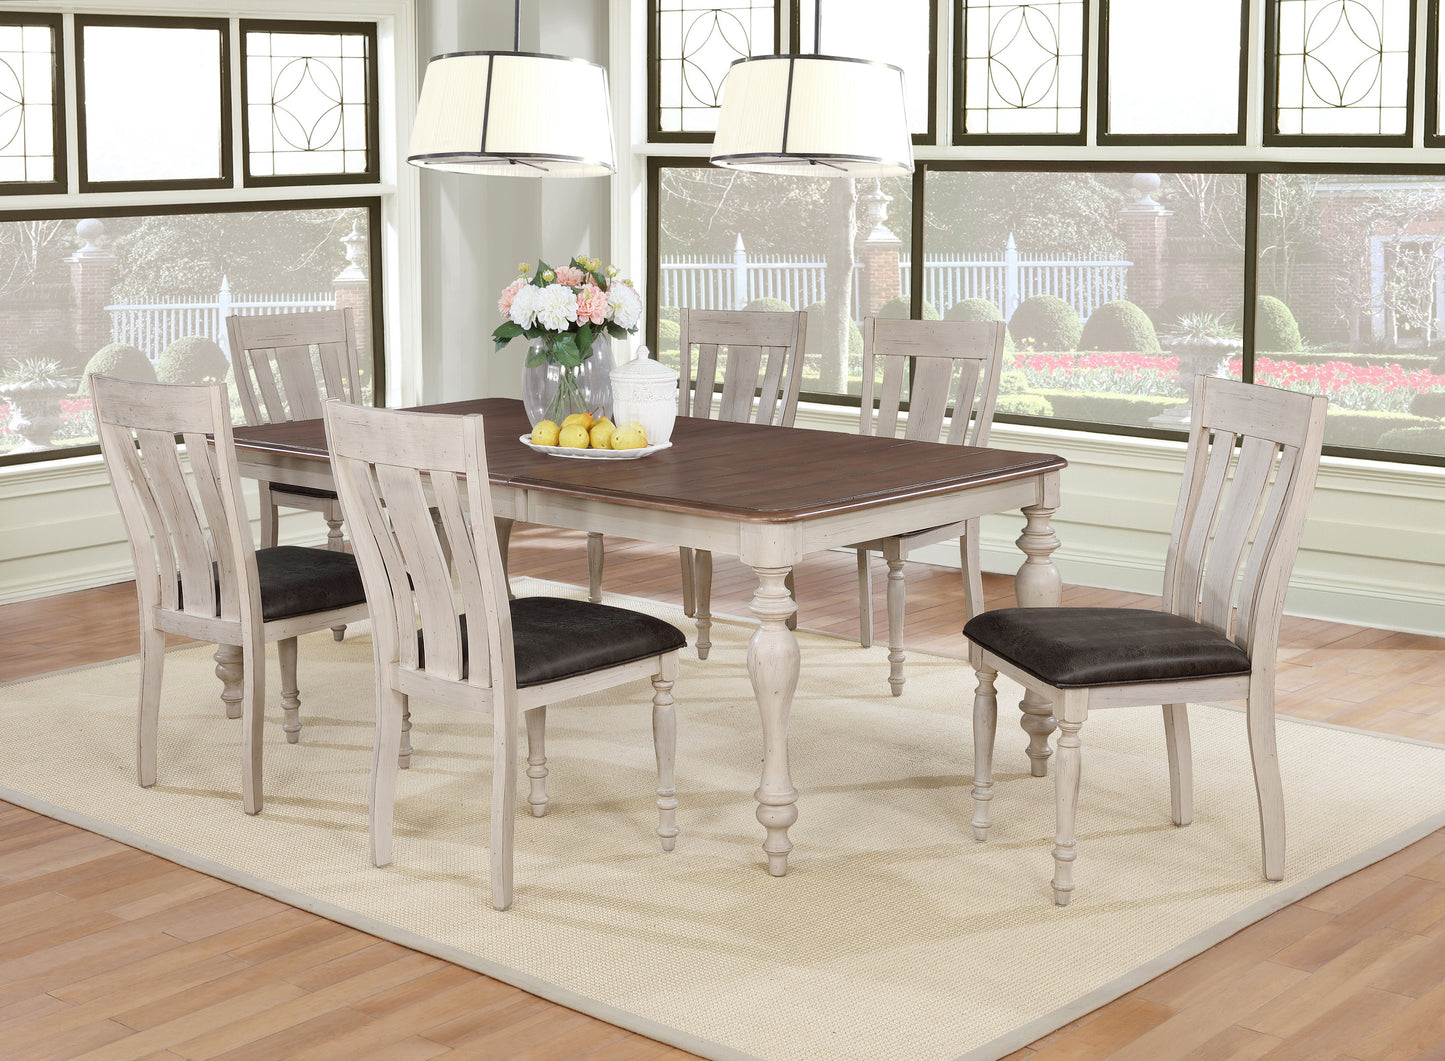 Arch Weathered Oak Dining Set: Table with Extension Leaf, Six Chairs